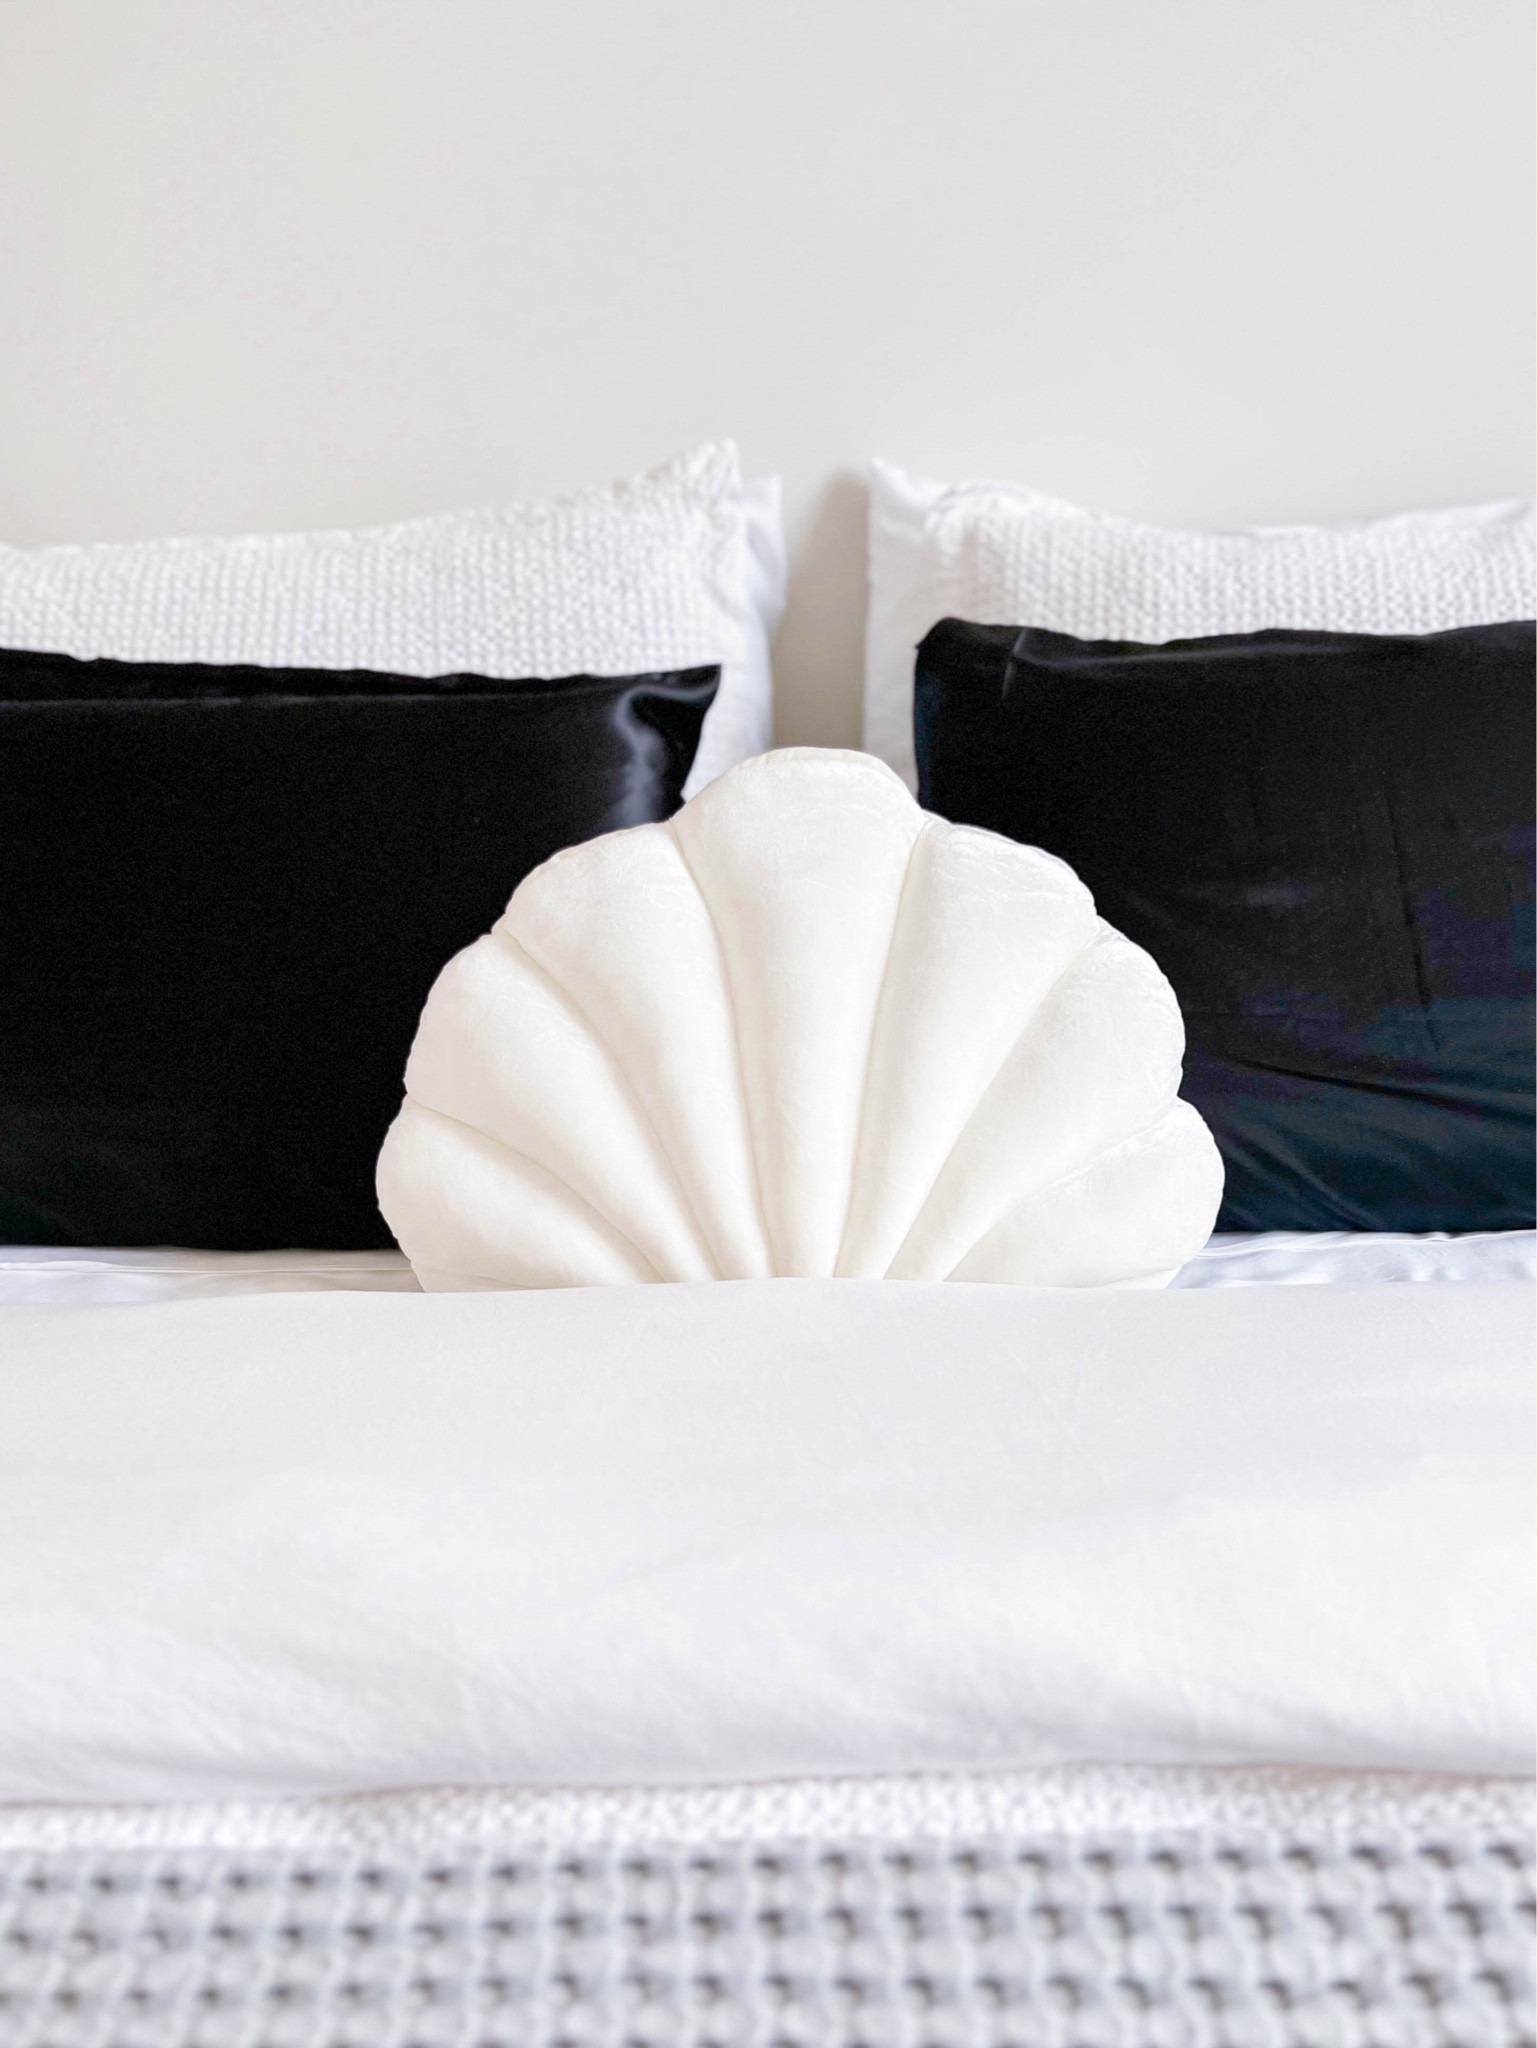  Sioloc Shell Pillows,Seashell Shaped Accent Throw